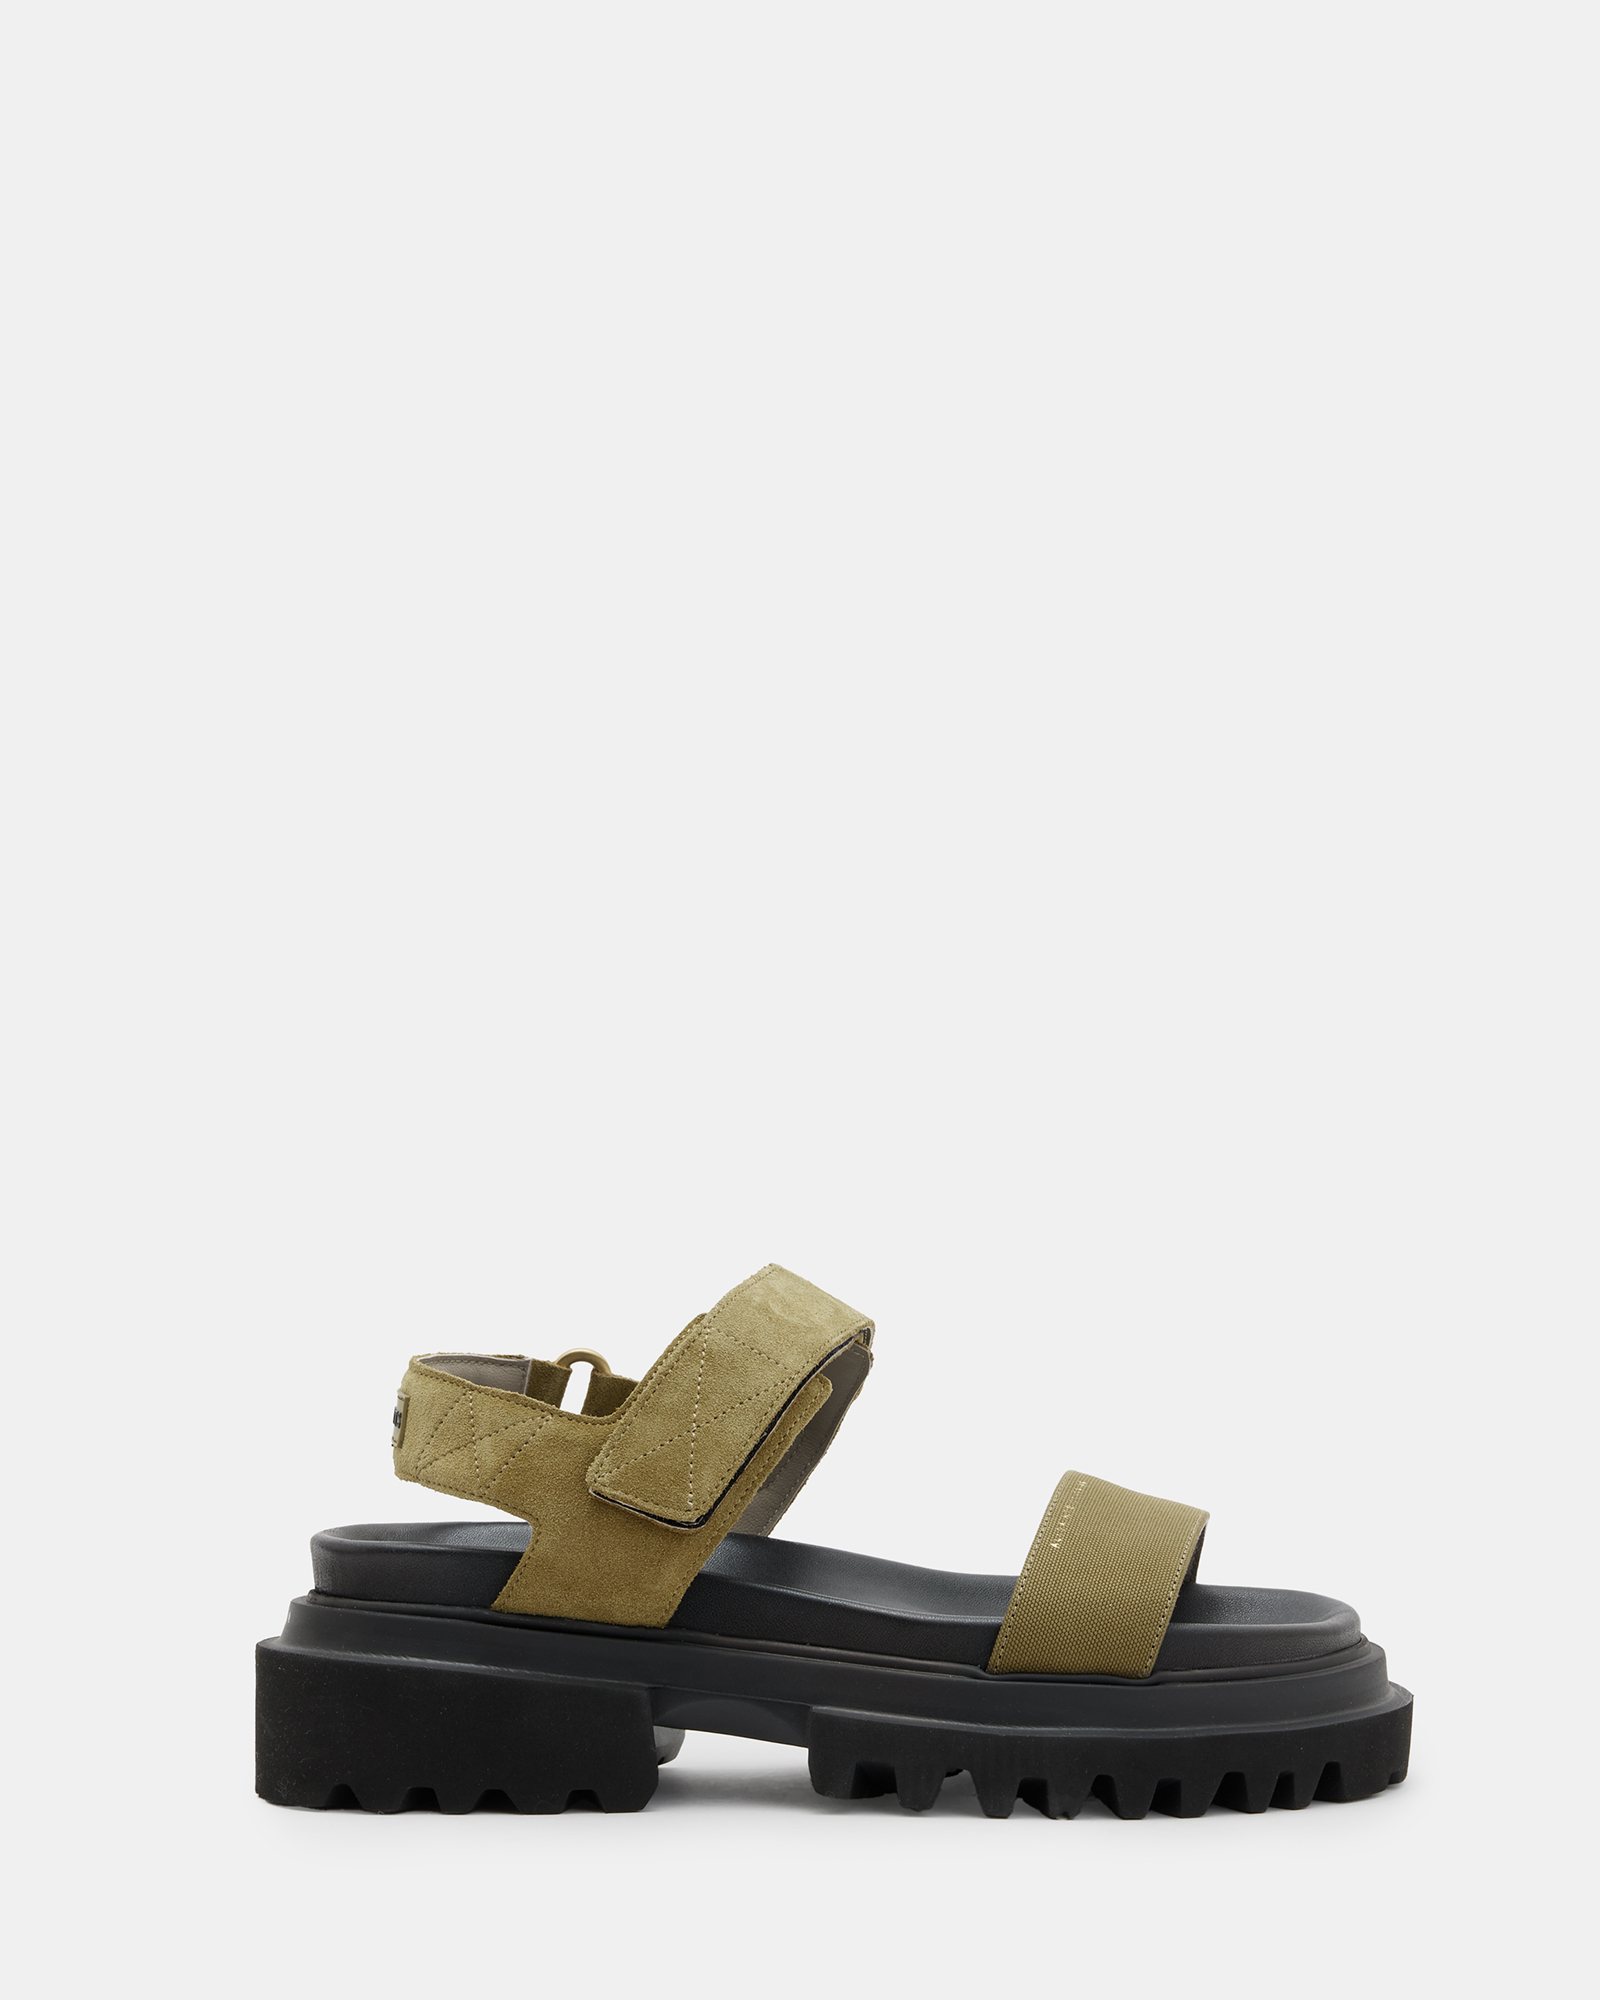 AllSaints Rory Chunky Suede Velcro Sandals,, KHAKI GREEN